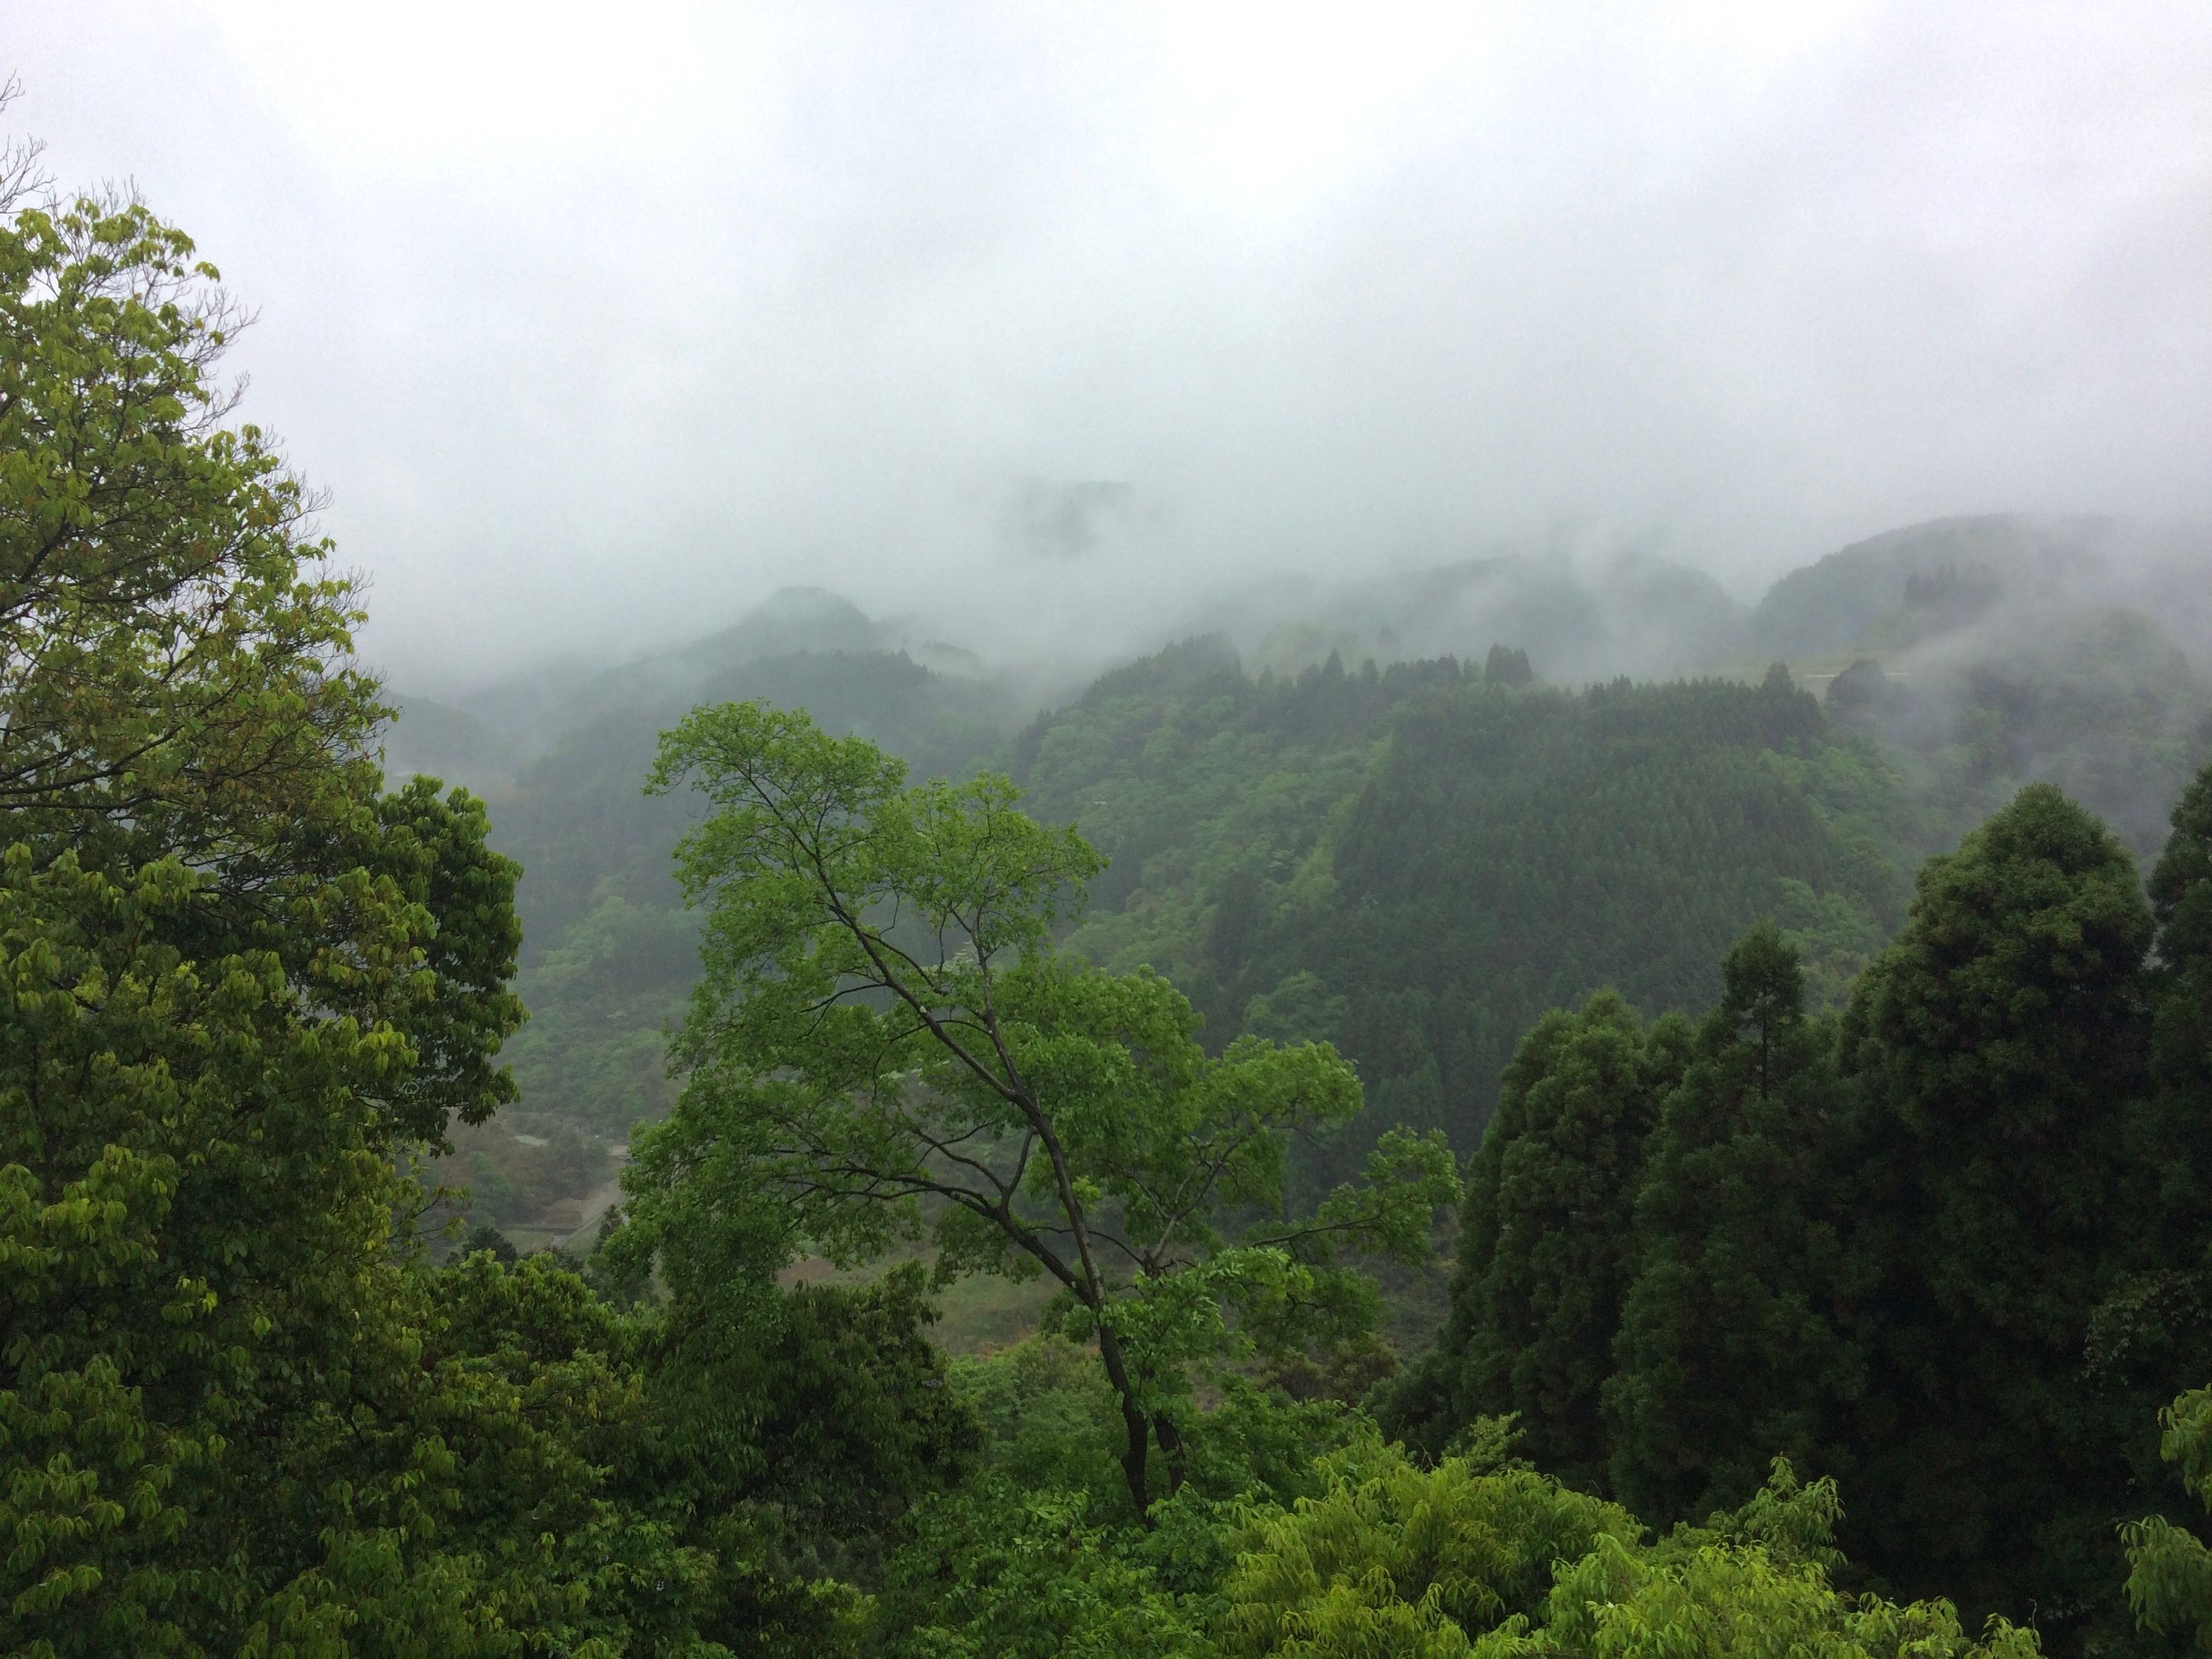 A landscape of low clouds above forested hills.